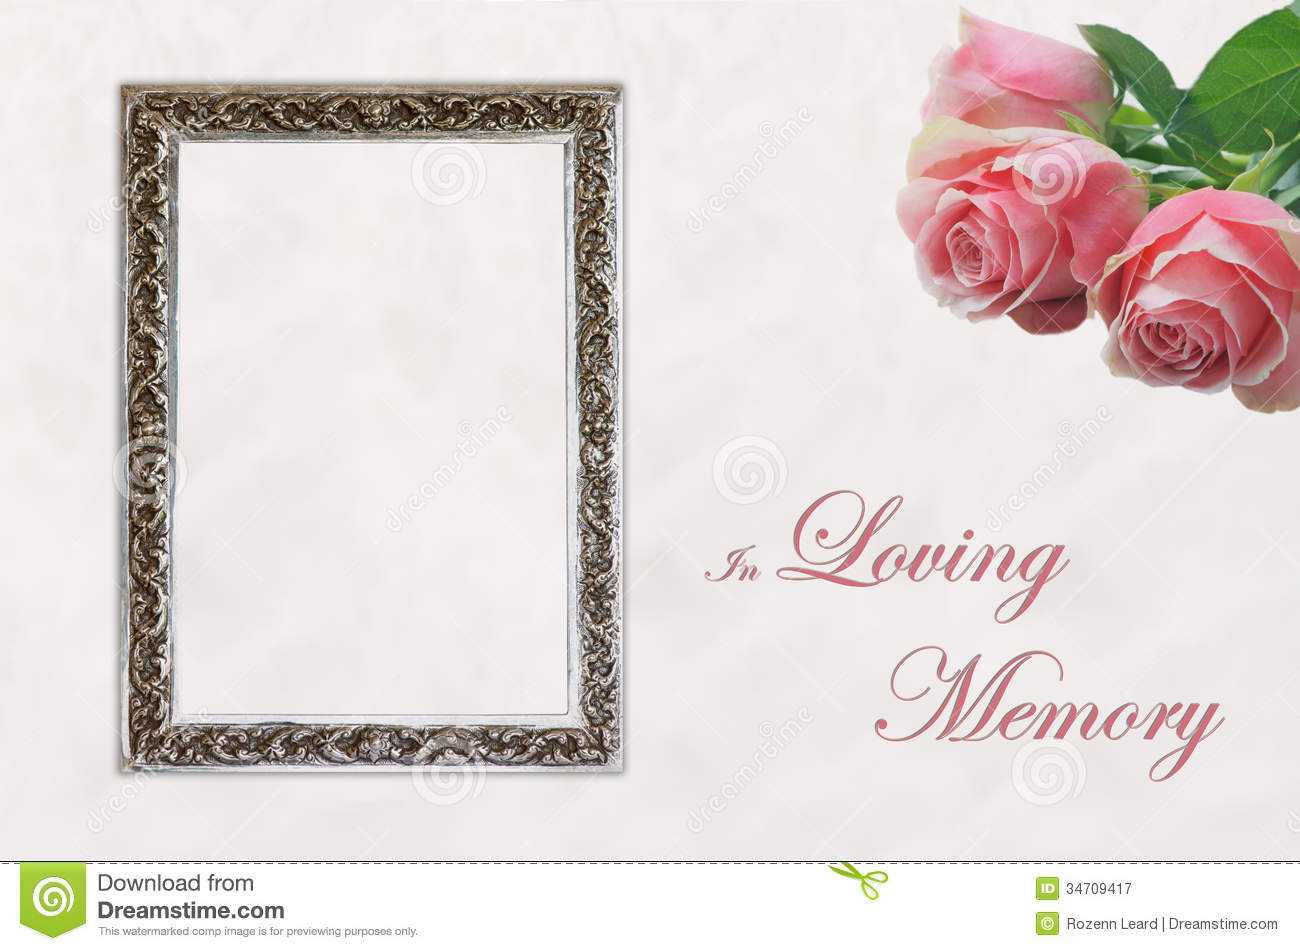 In Memory Cards Templates ] - Memory Template 4 Celebration Regarding In Memory Cards Templates